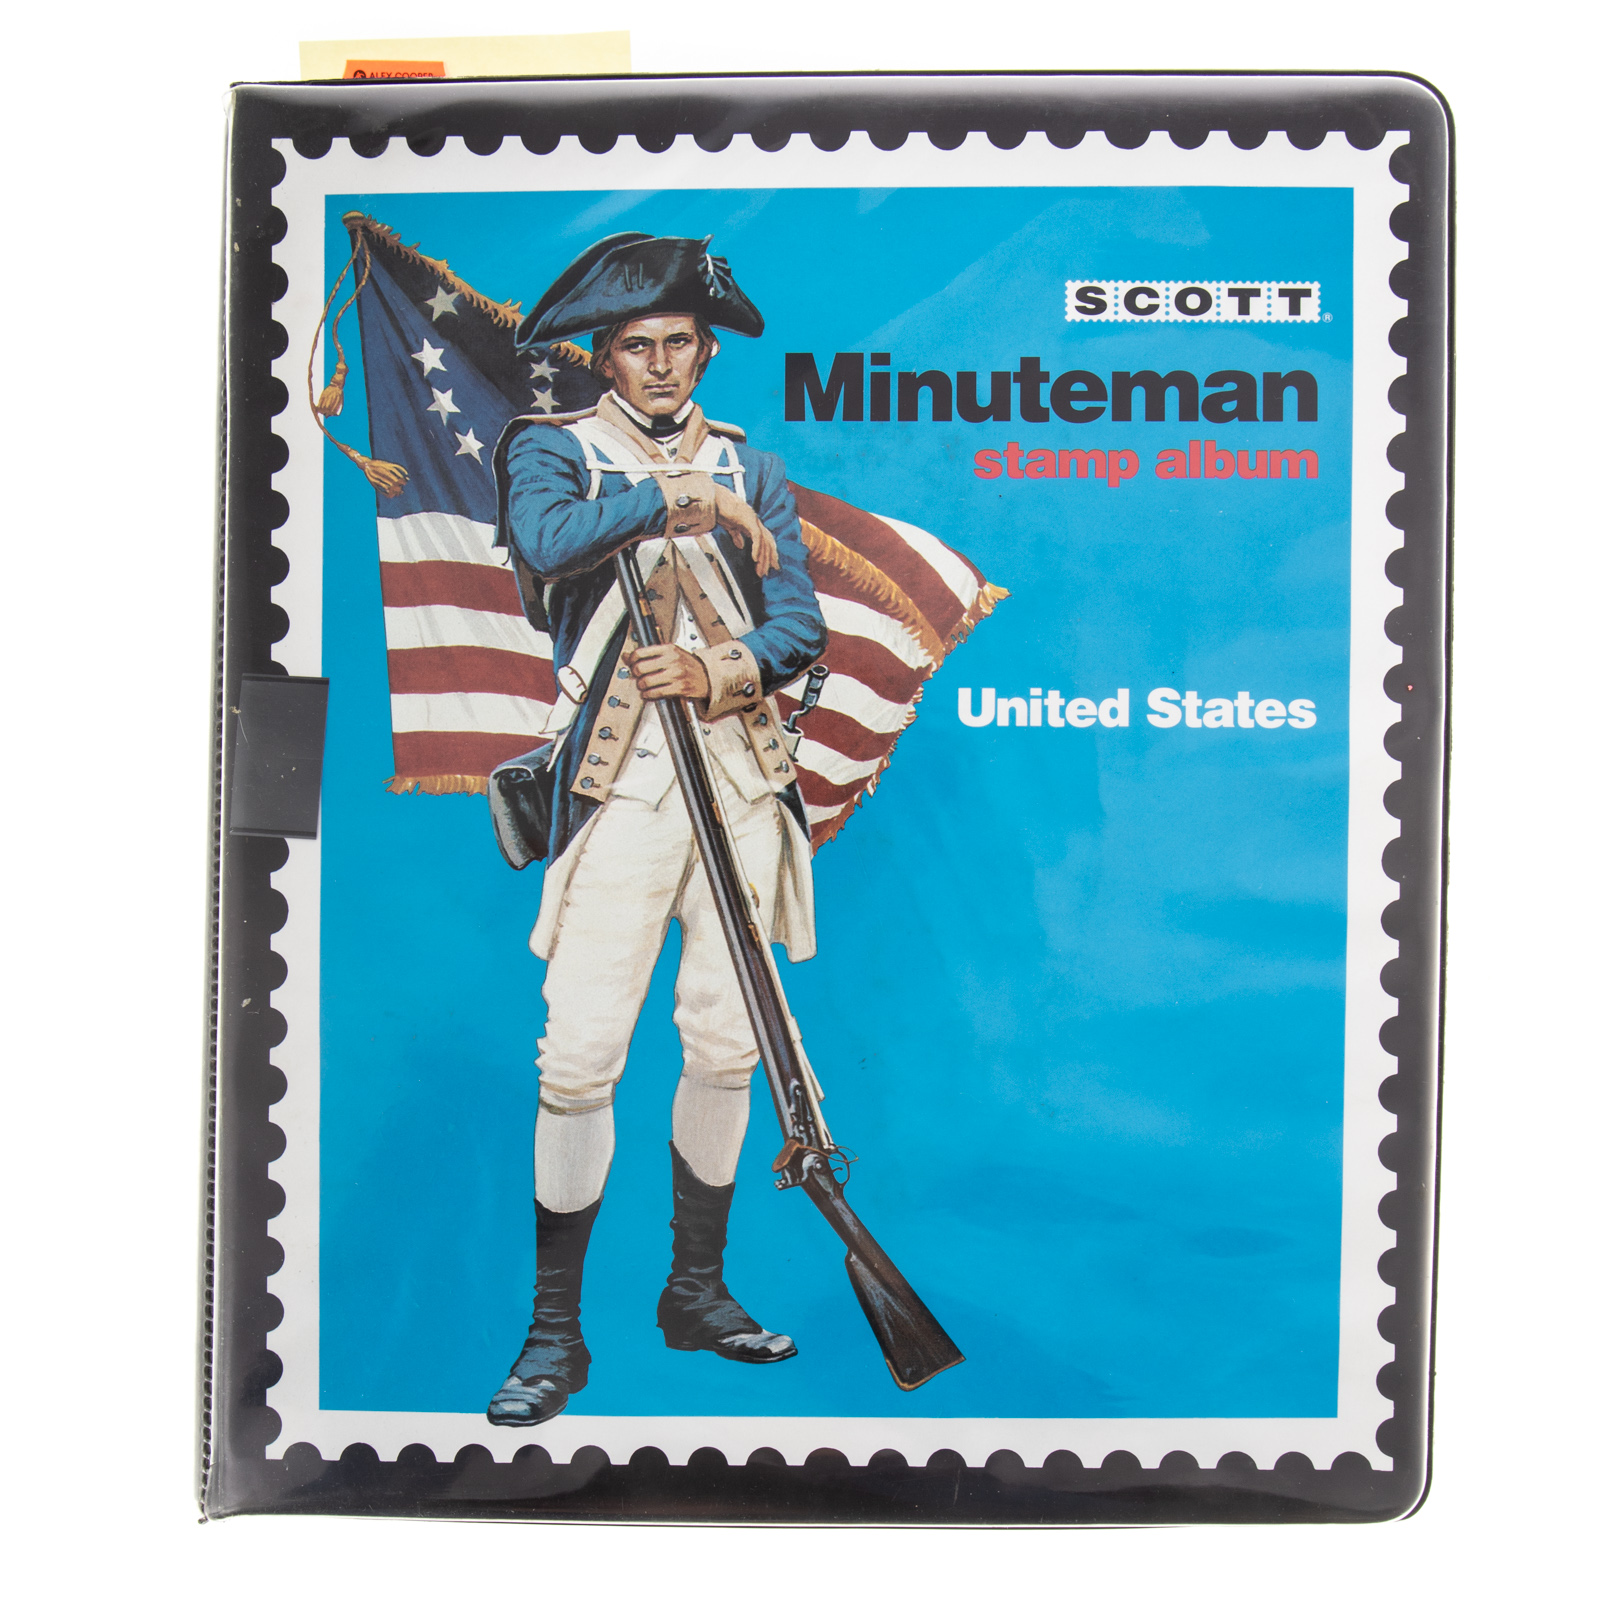 COLLECTION OF UNITED STATES POSTAGE